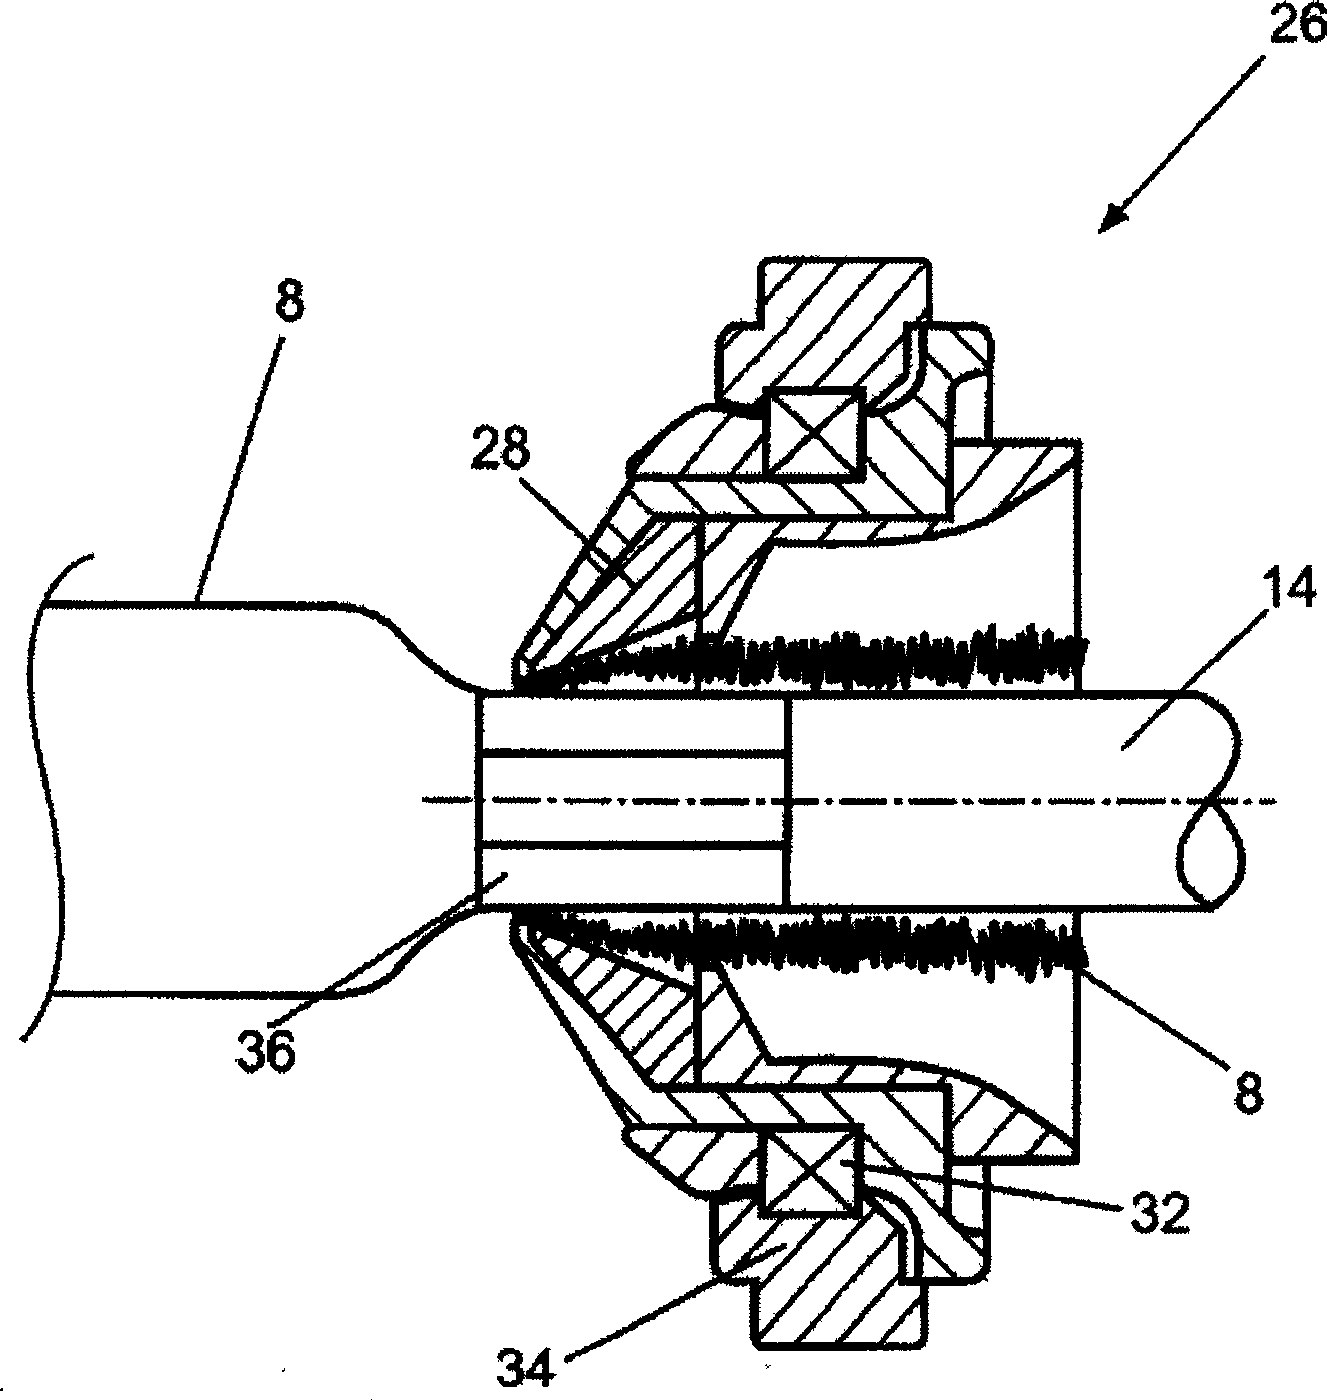 Filling apparatus, machine and method for filling of casings, particularly sausage casings